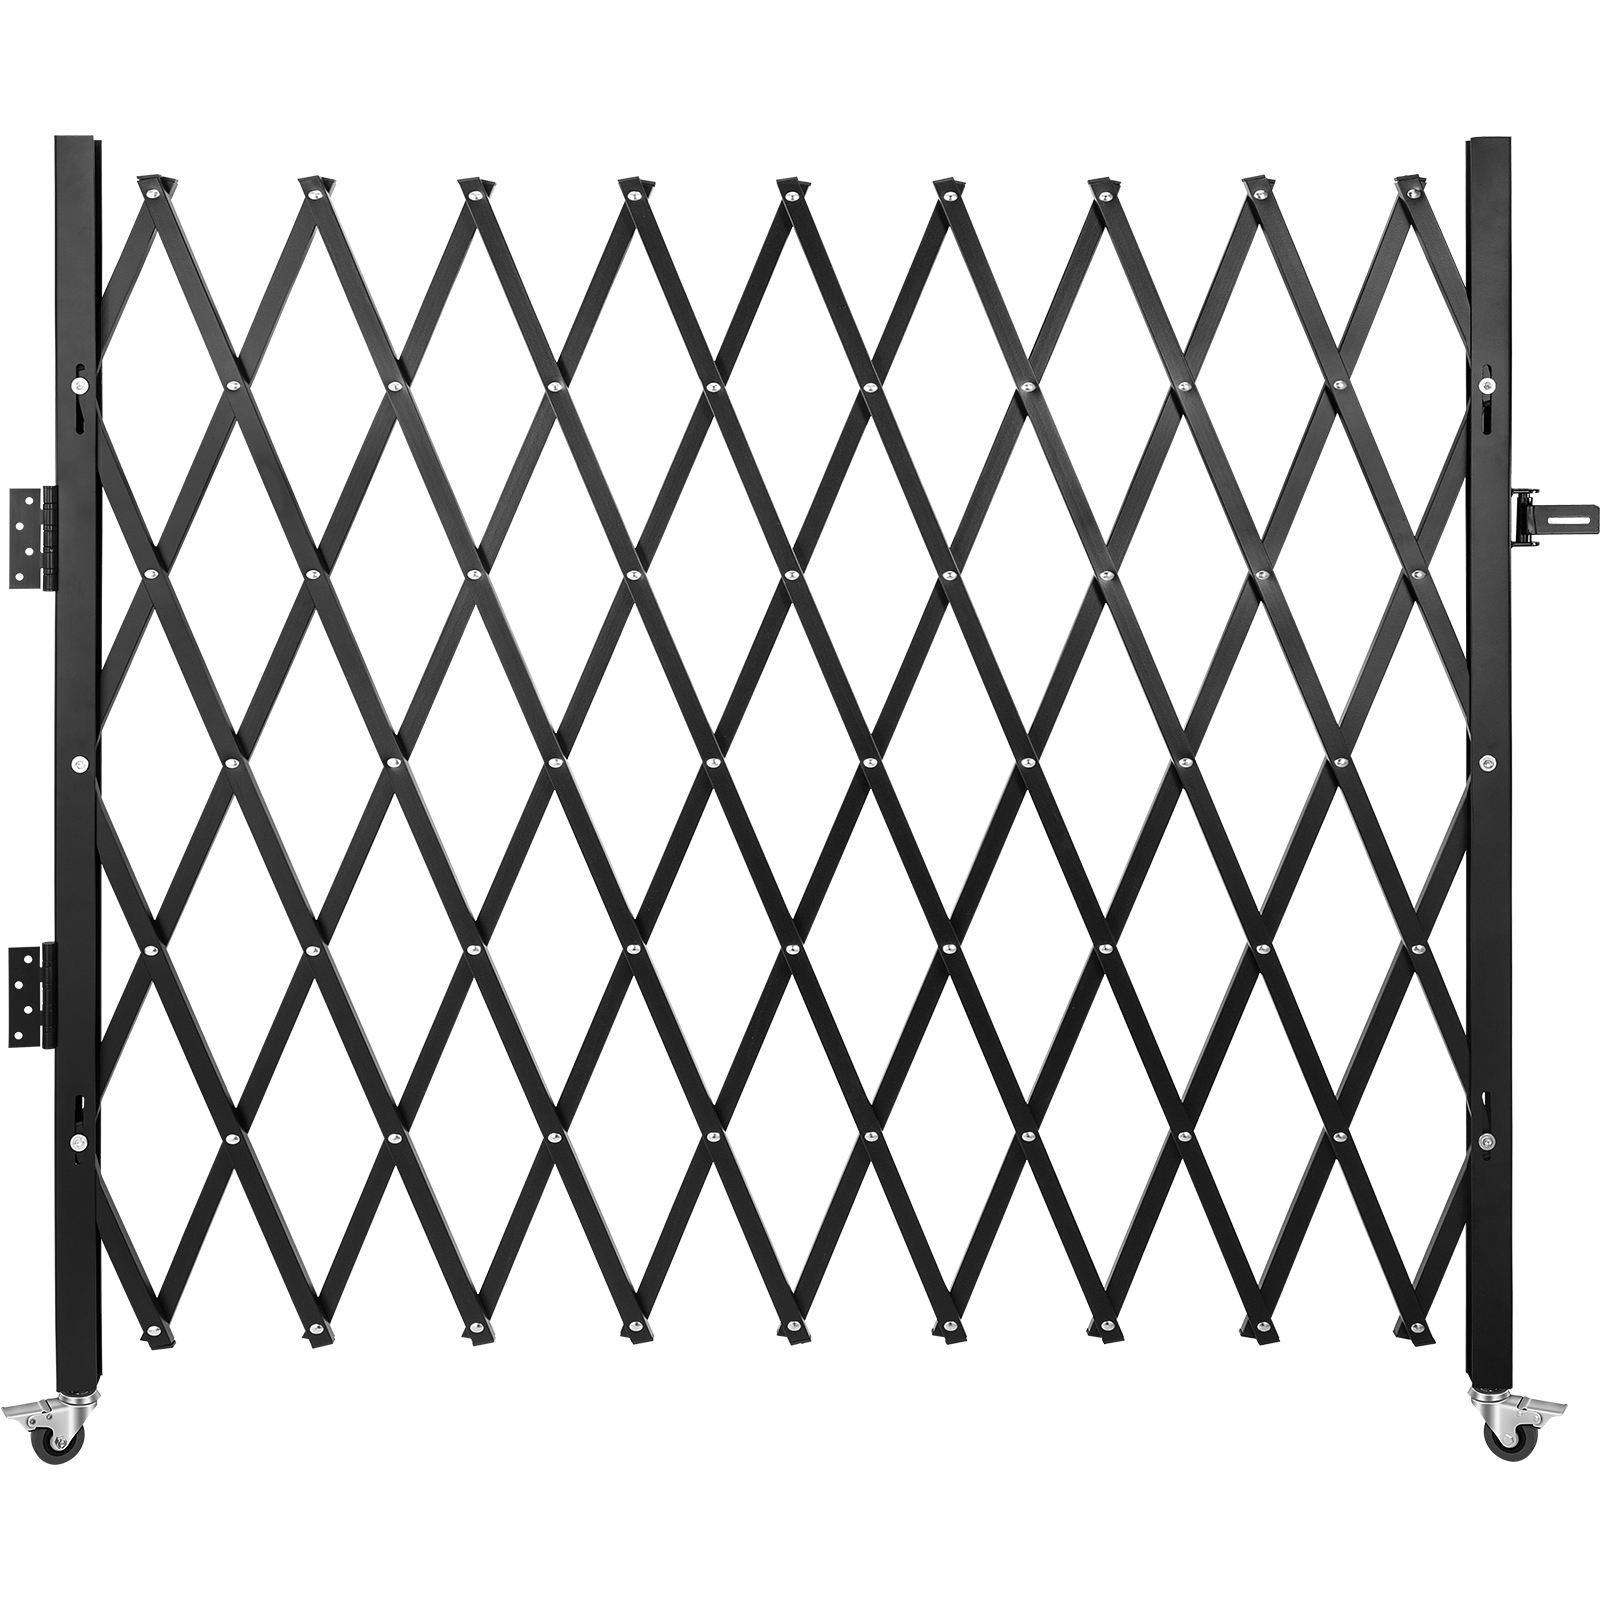 security gates for doors